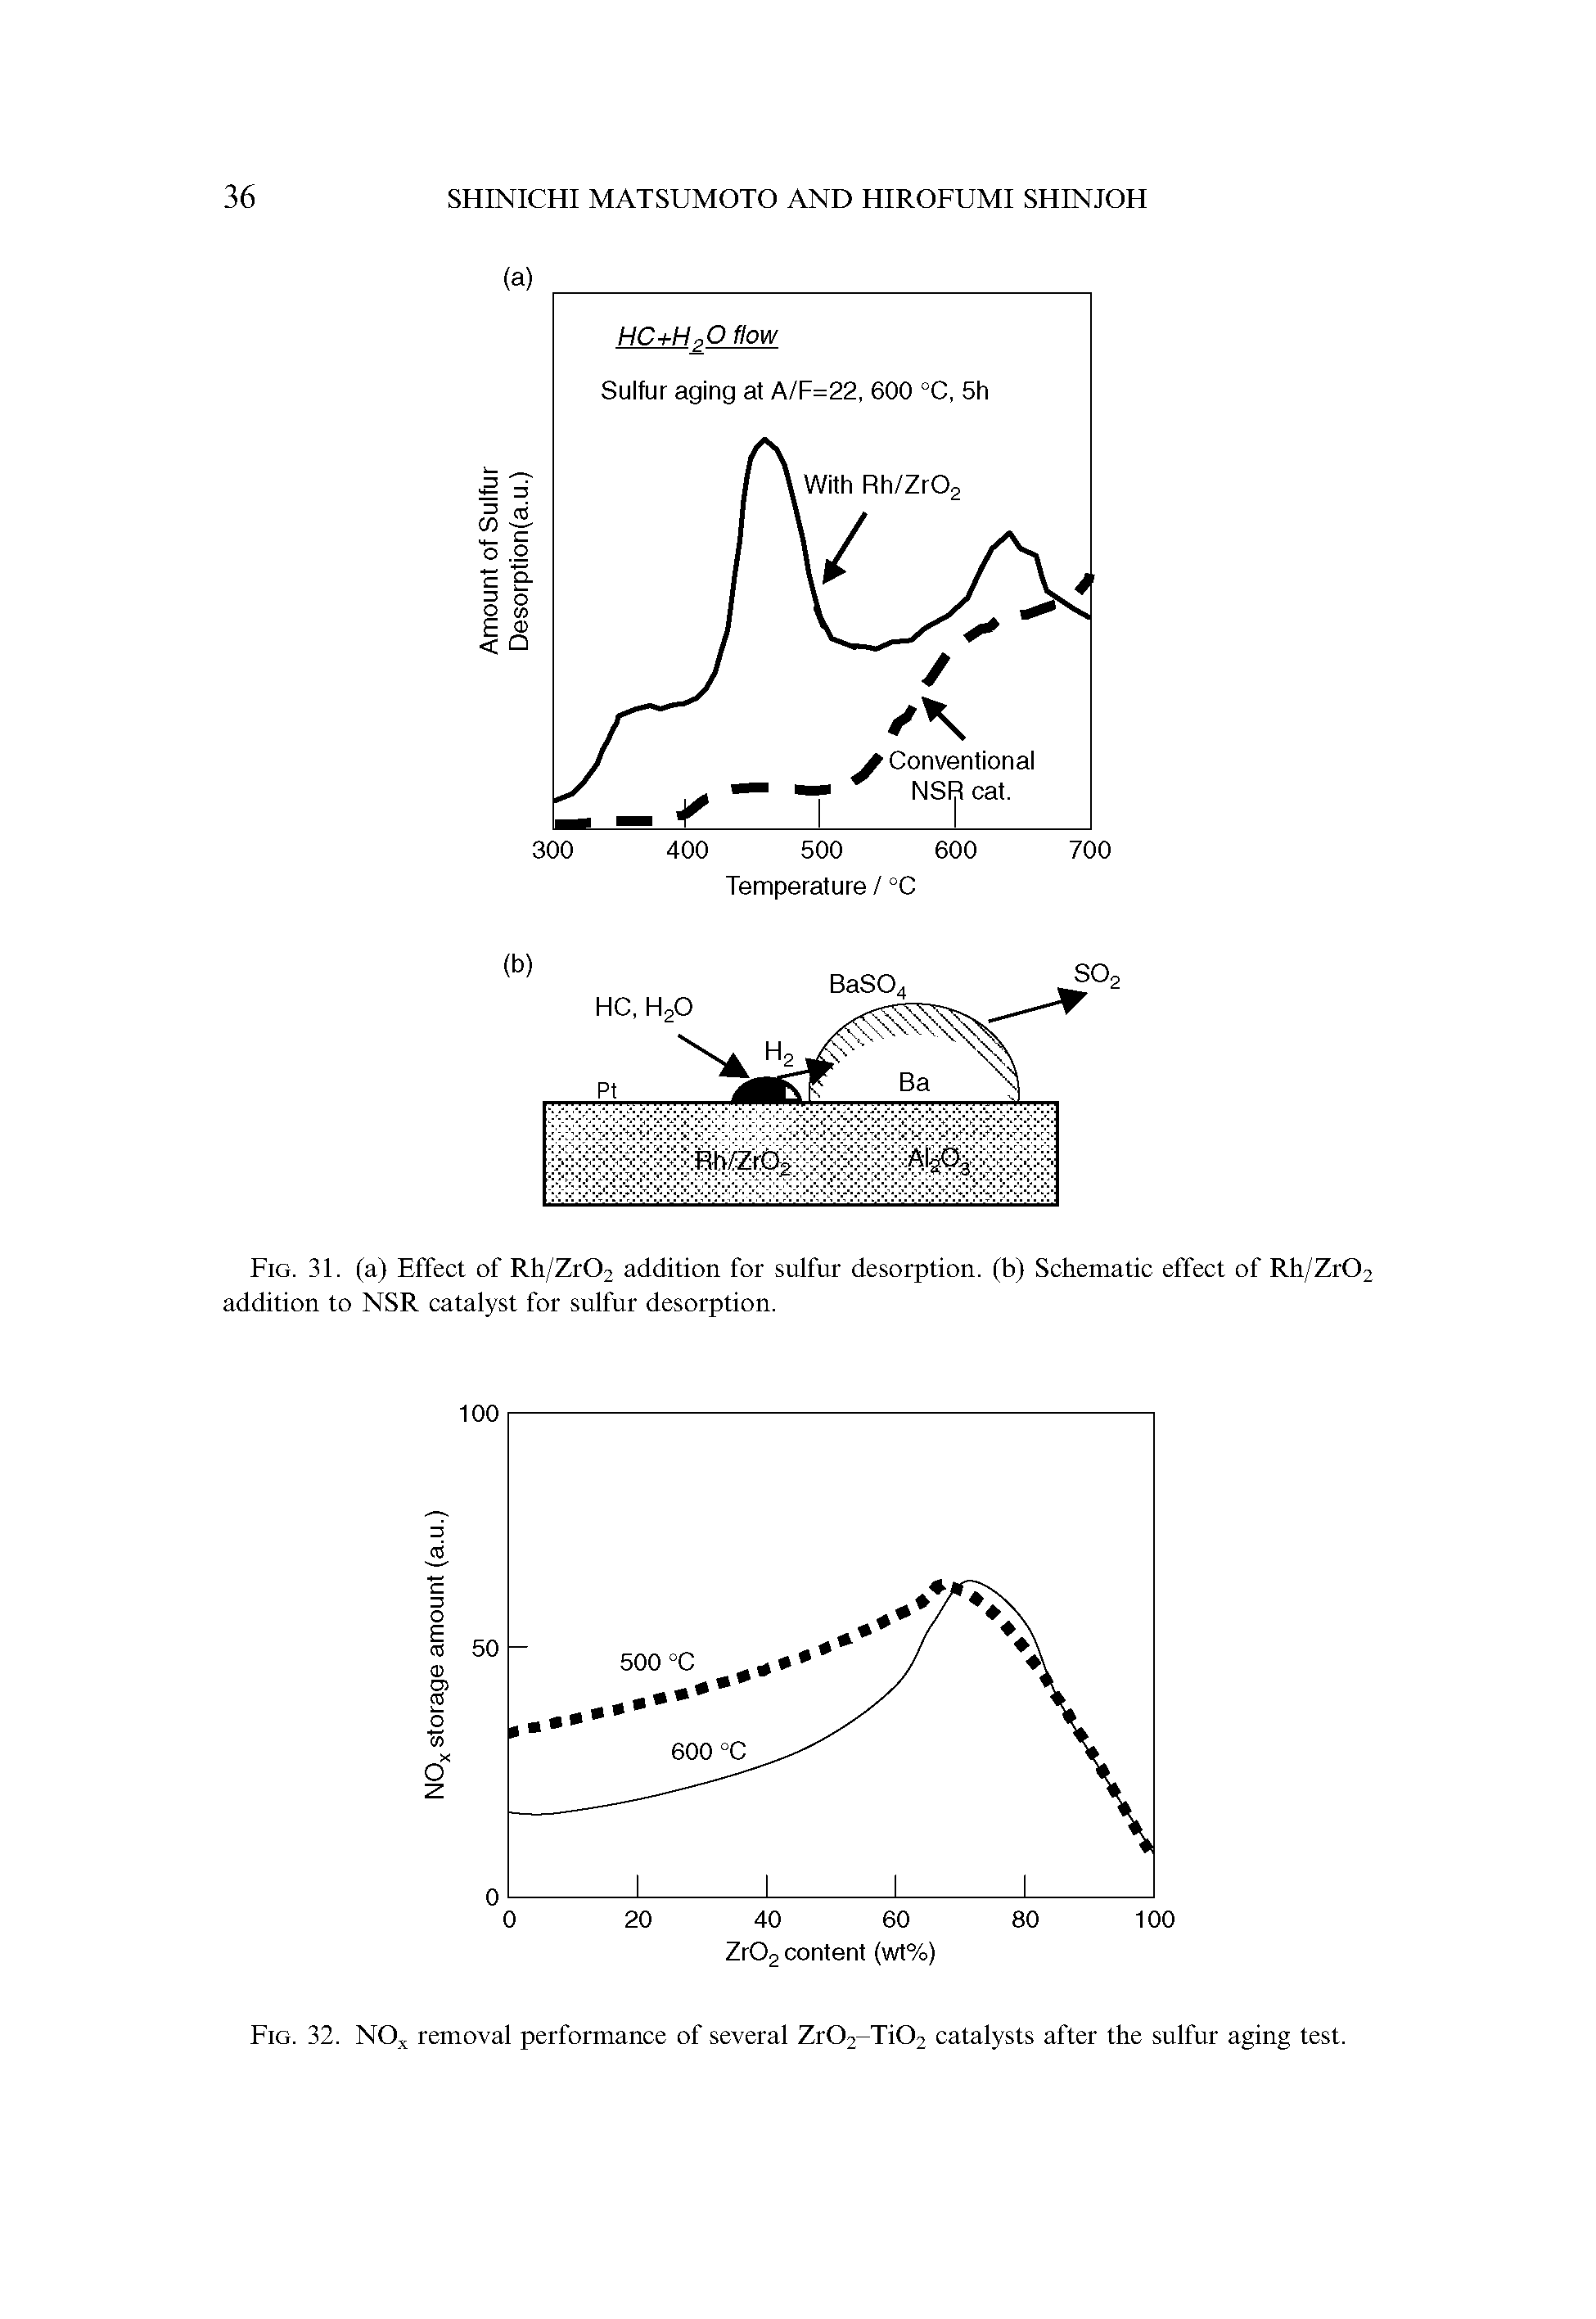 Fig. 32. NOx removal performance of several Zr02-Ti02 catalysts after the sulfur aging test.